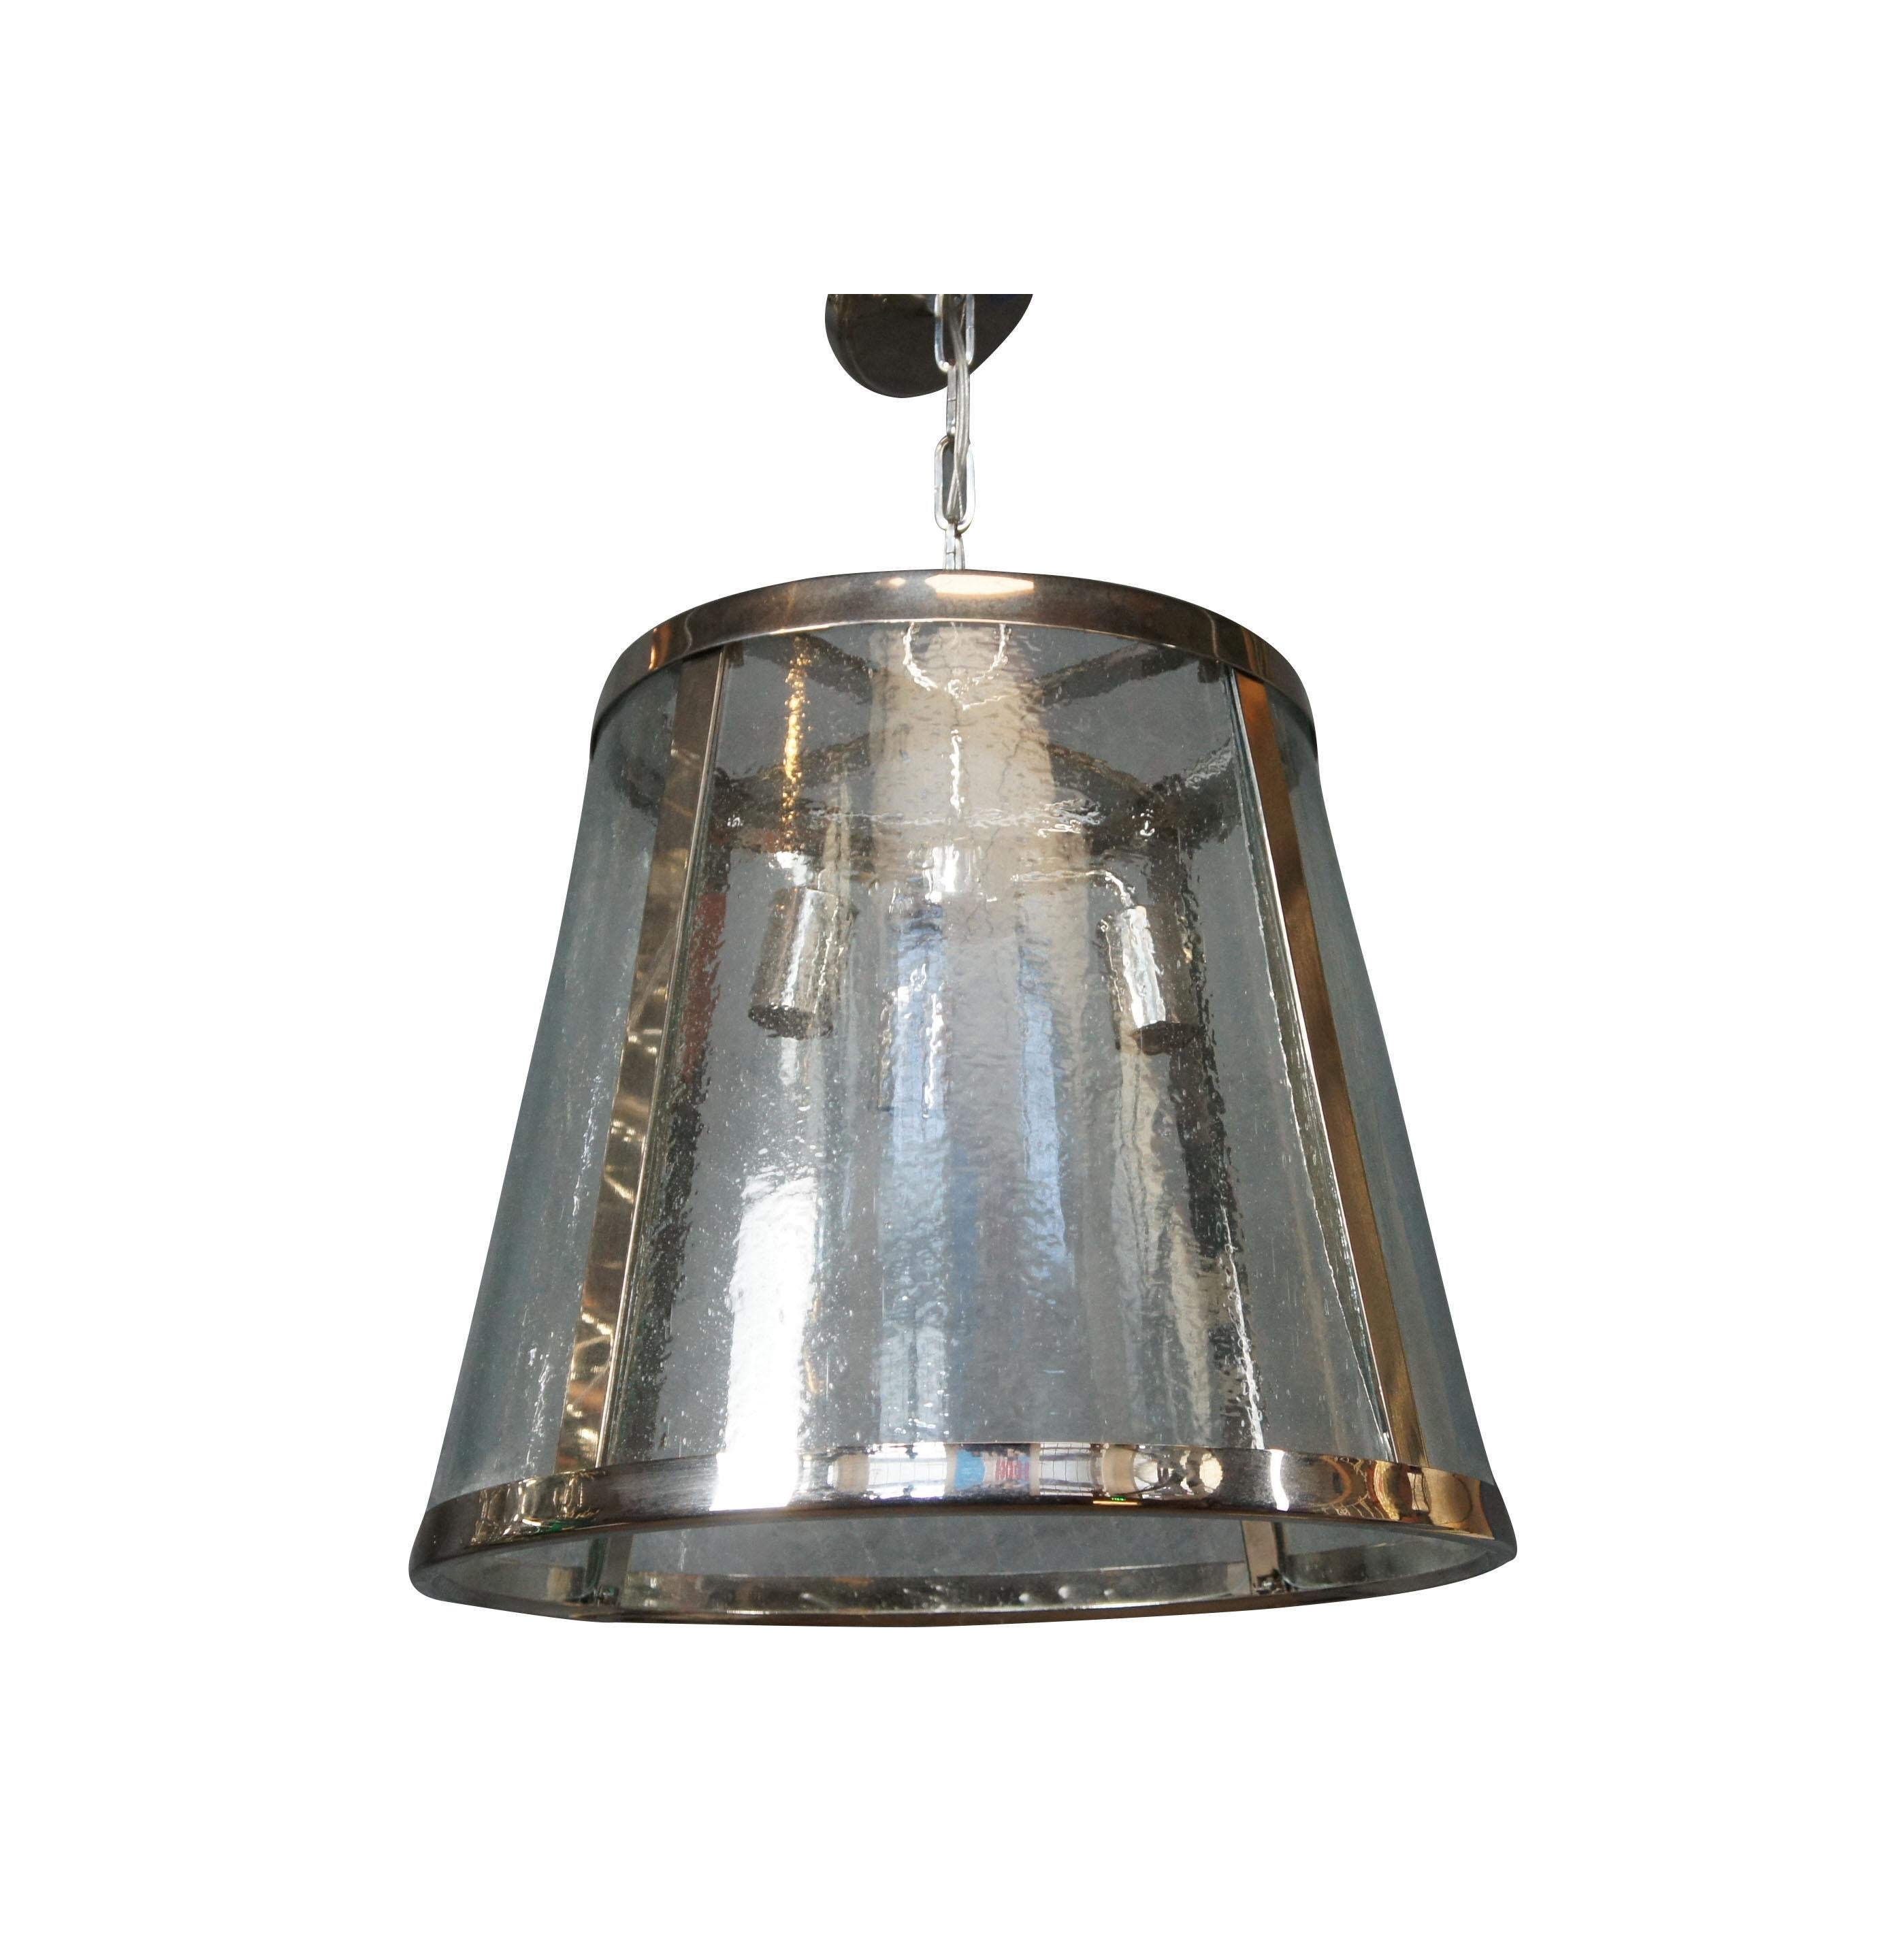 Visual Comfort Studio Collection Harrow Large Pendant Light. Features a tapered shade with polished nickel finish, seeded glass and 3 lights. 3 Available

Chain Length - 10